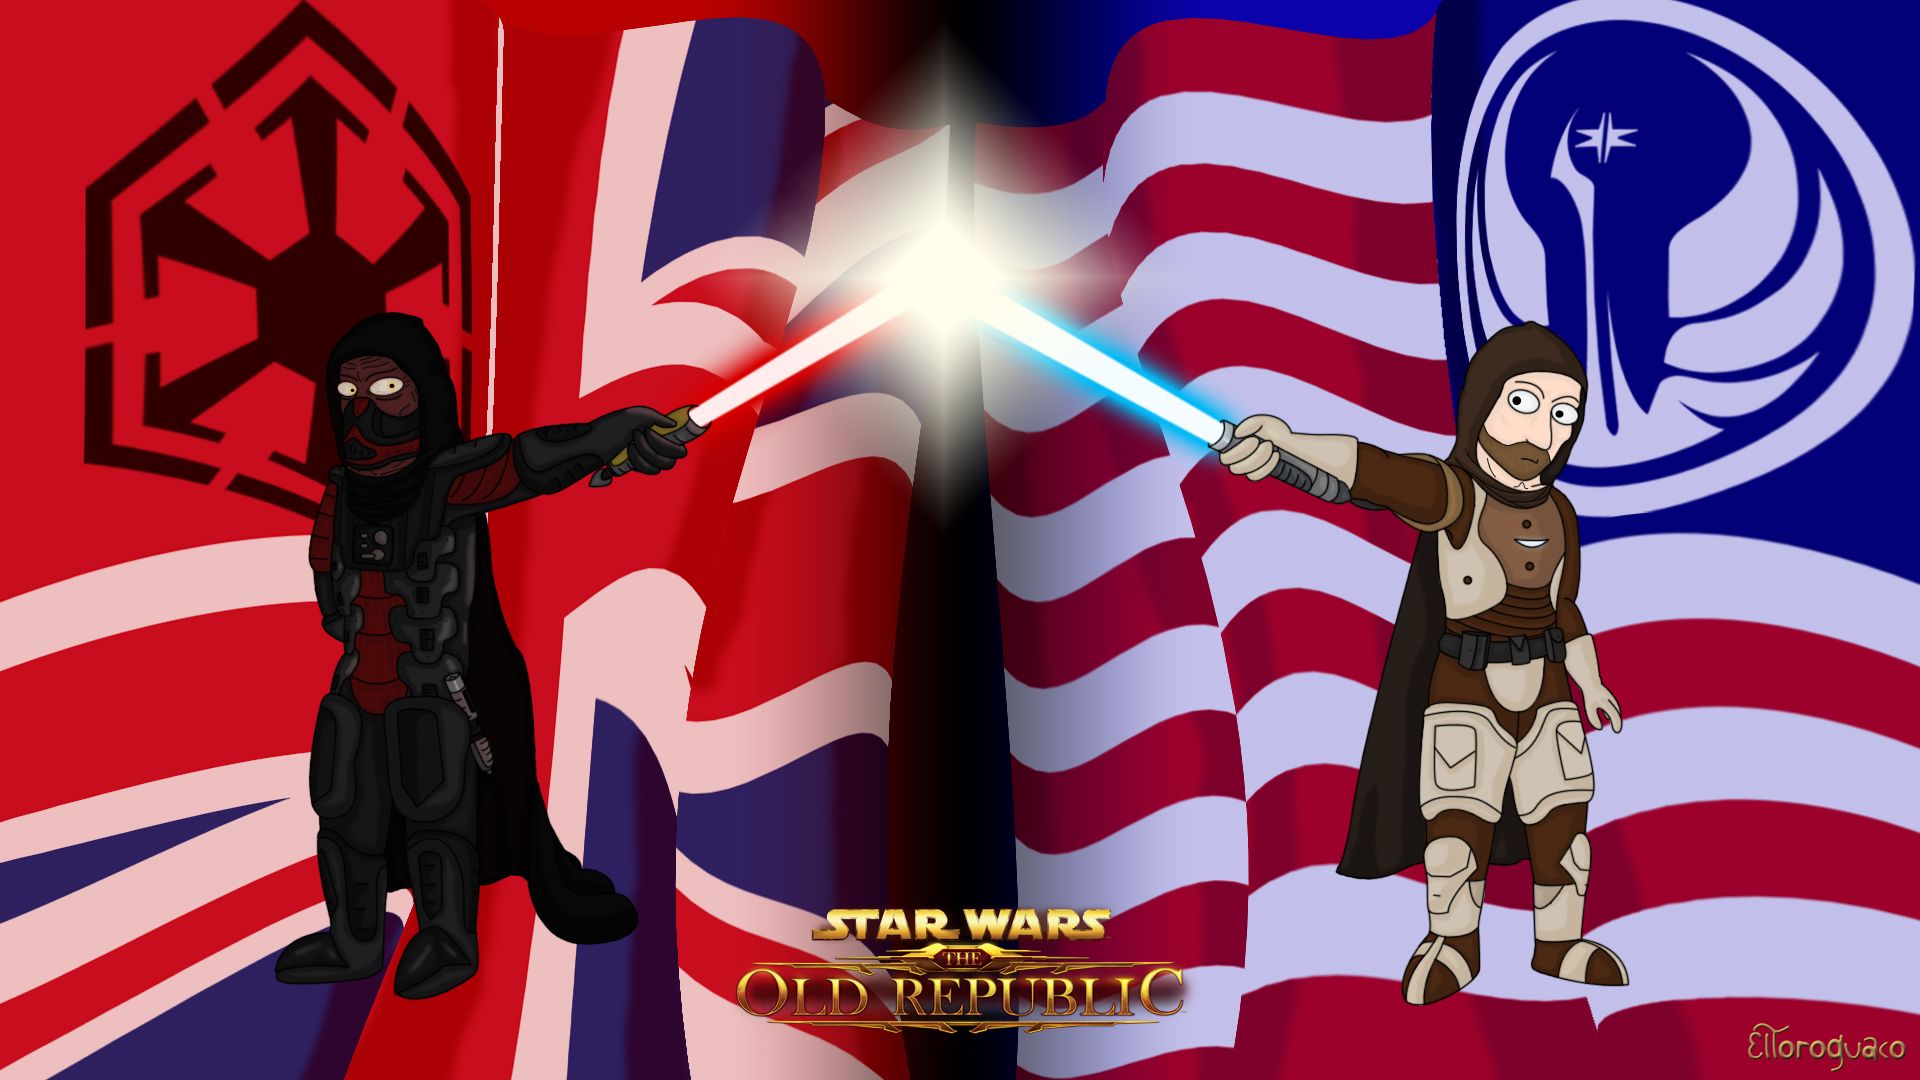 STAR WARS: The Old Republic - swtor Faction Wallpaper (comic style)